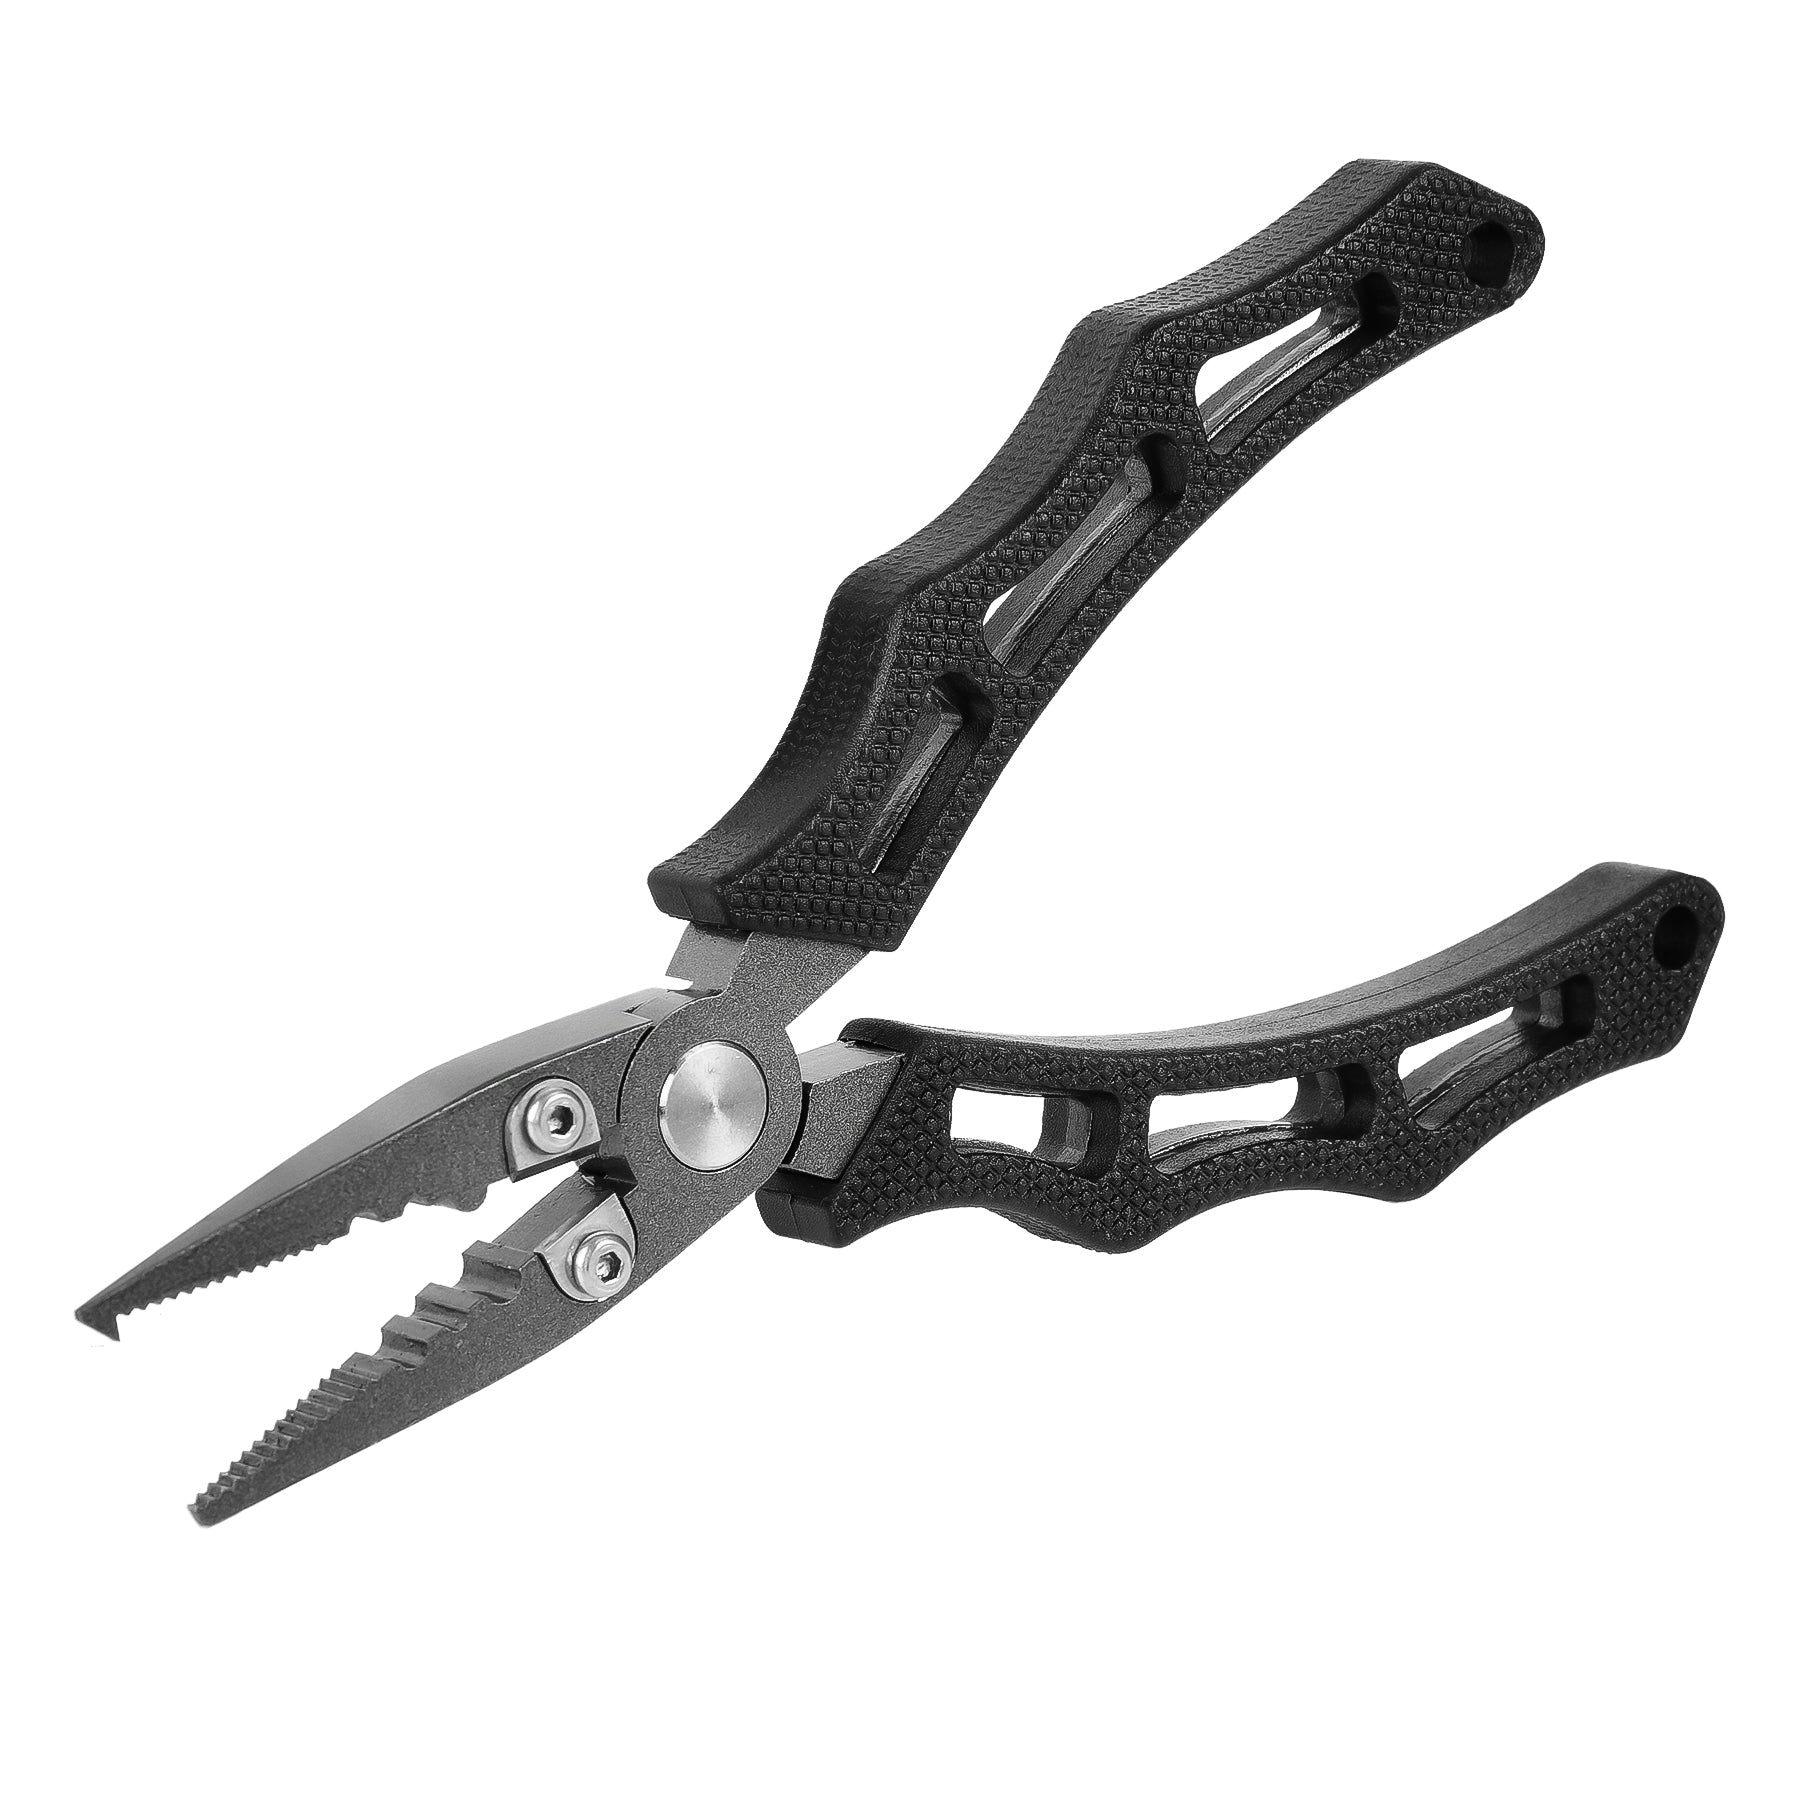 F07 Fishing Pliers Stainless Steel Construction Small Size – Booms